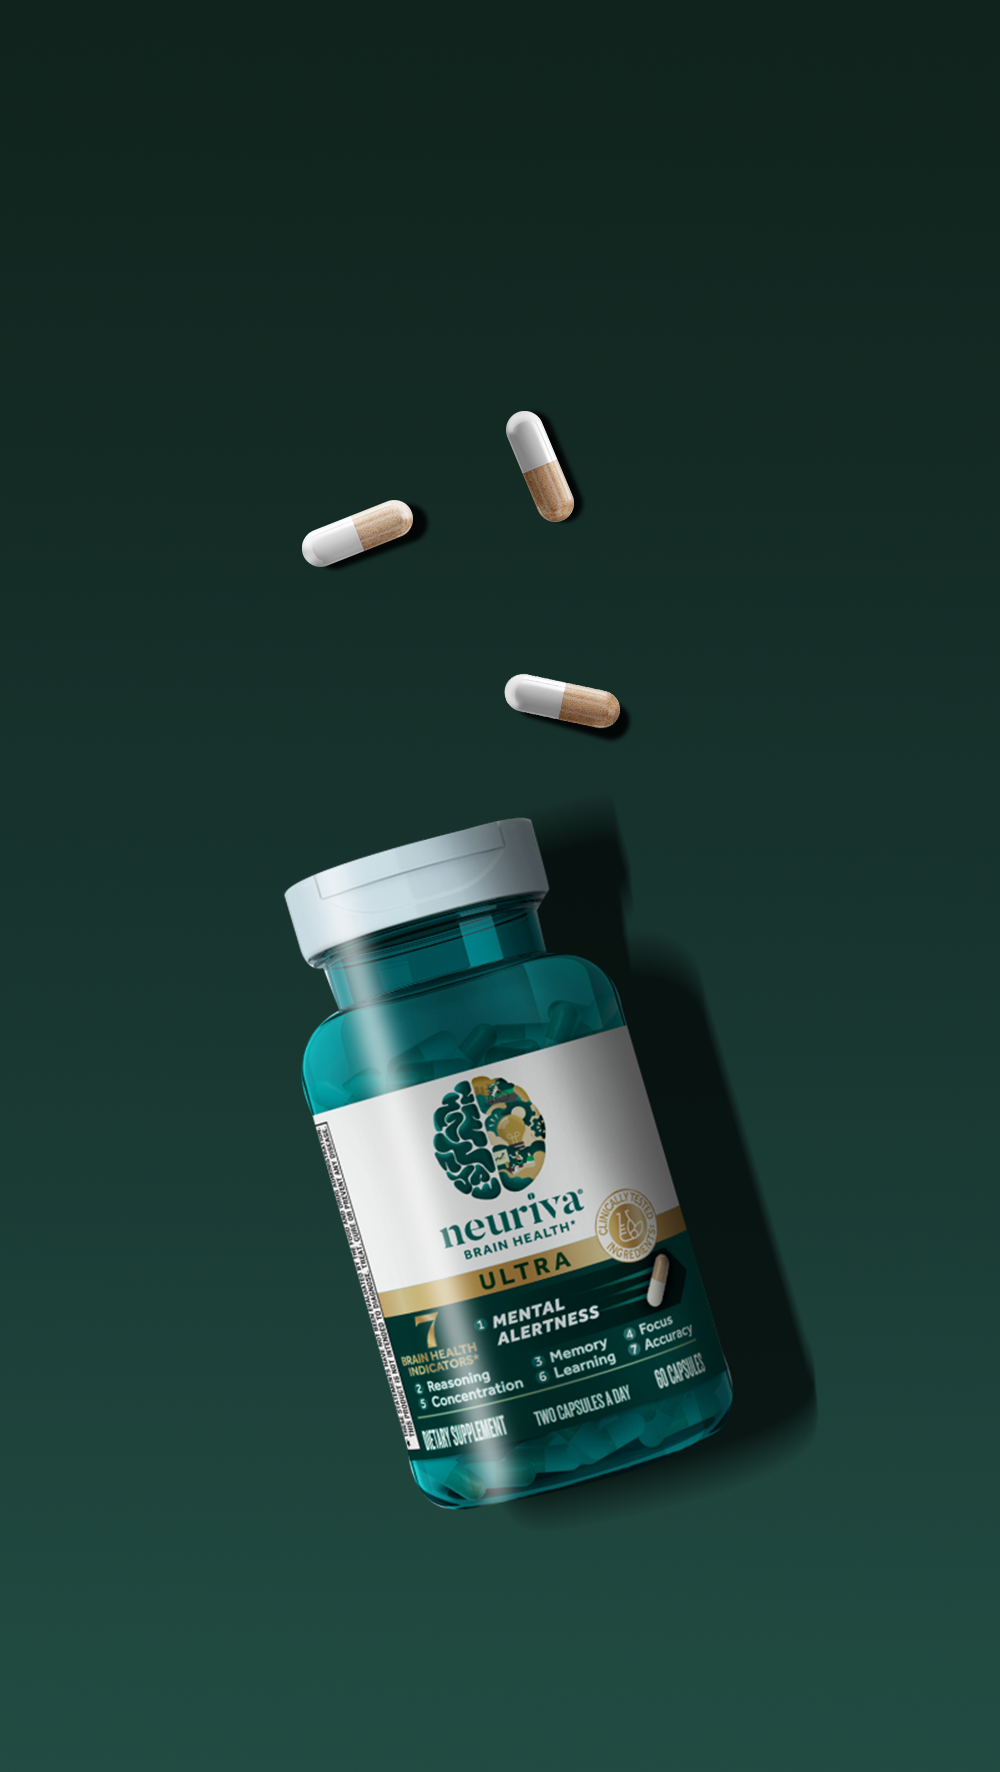 Brain health supplements: What you need to know